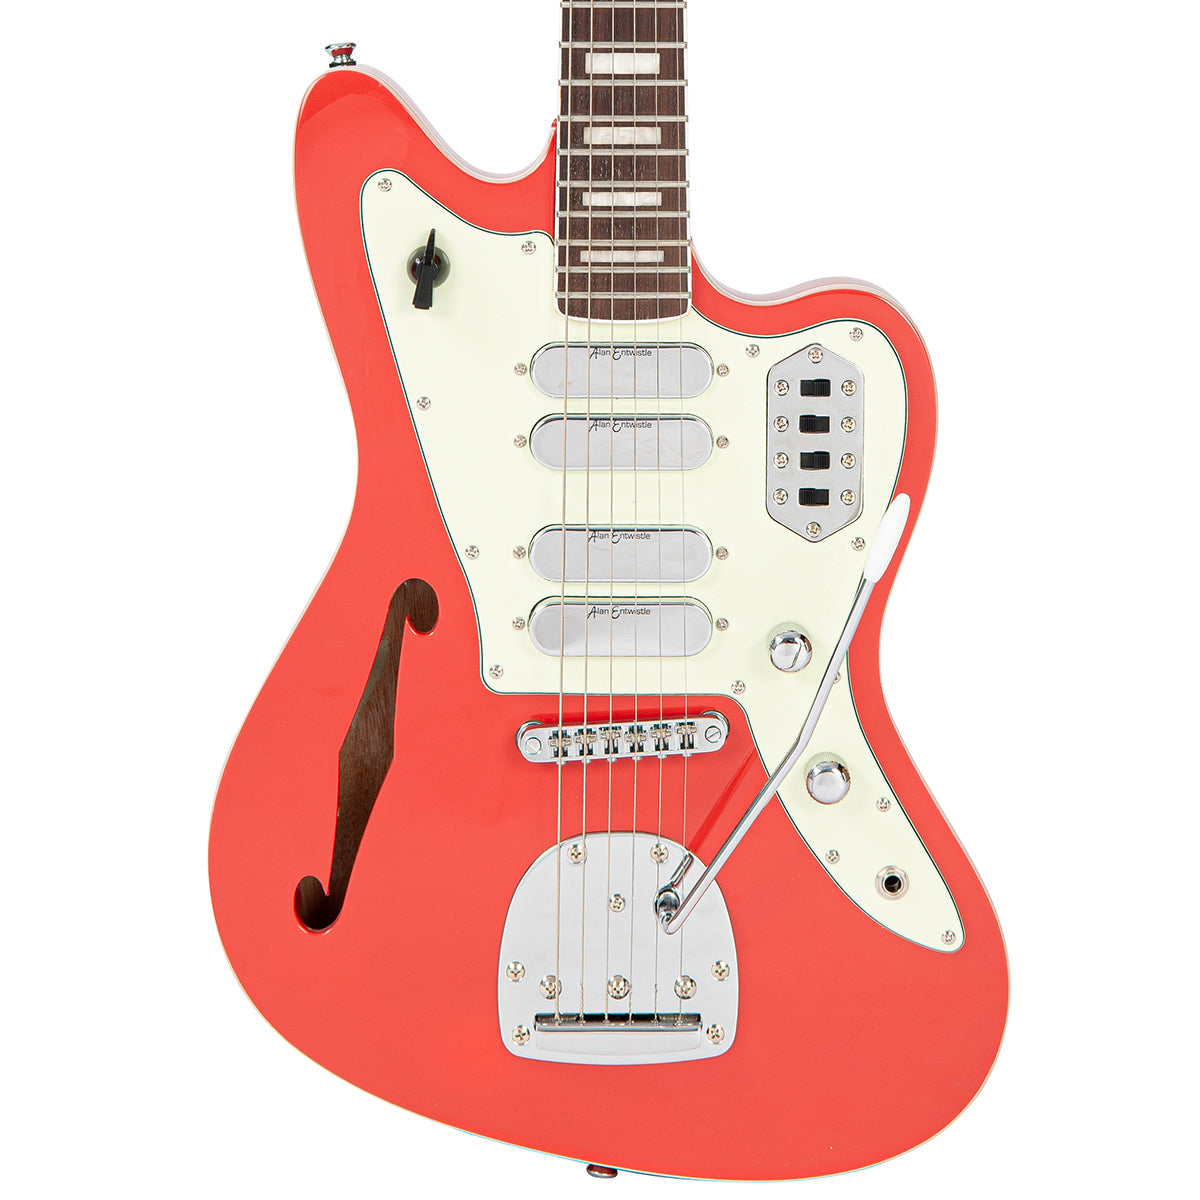 Vintage REVO Series 'Surfmaster Quad' Electric Guitar ~ Firenza Red, Electric Guitars for sale at Richards Guitars.